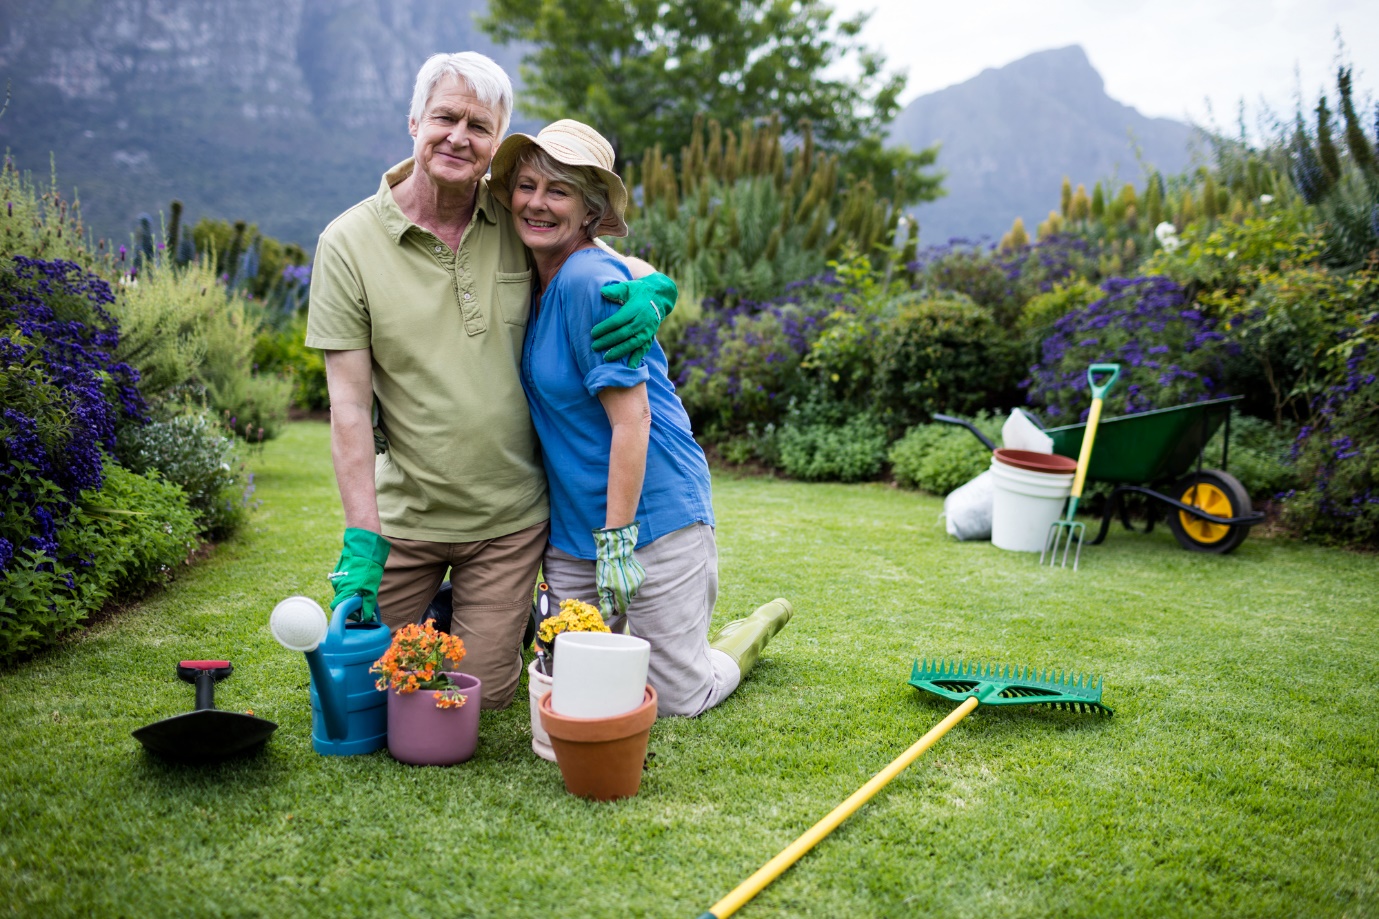 Lawn maintenance tips for seniors that requires little work